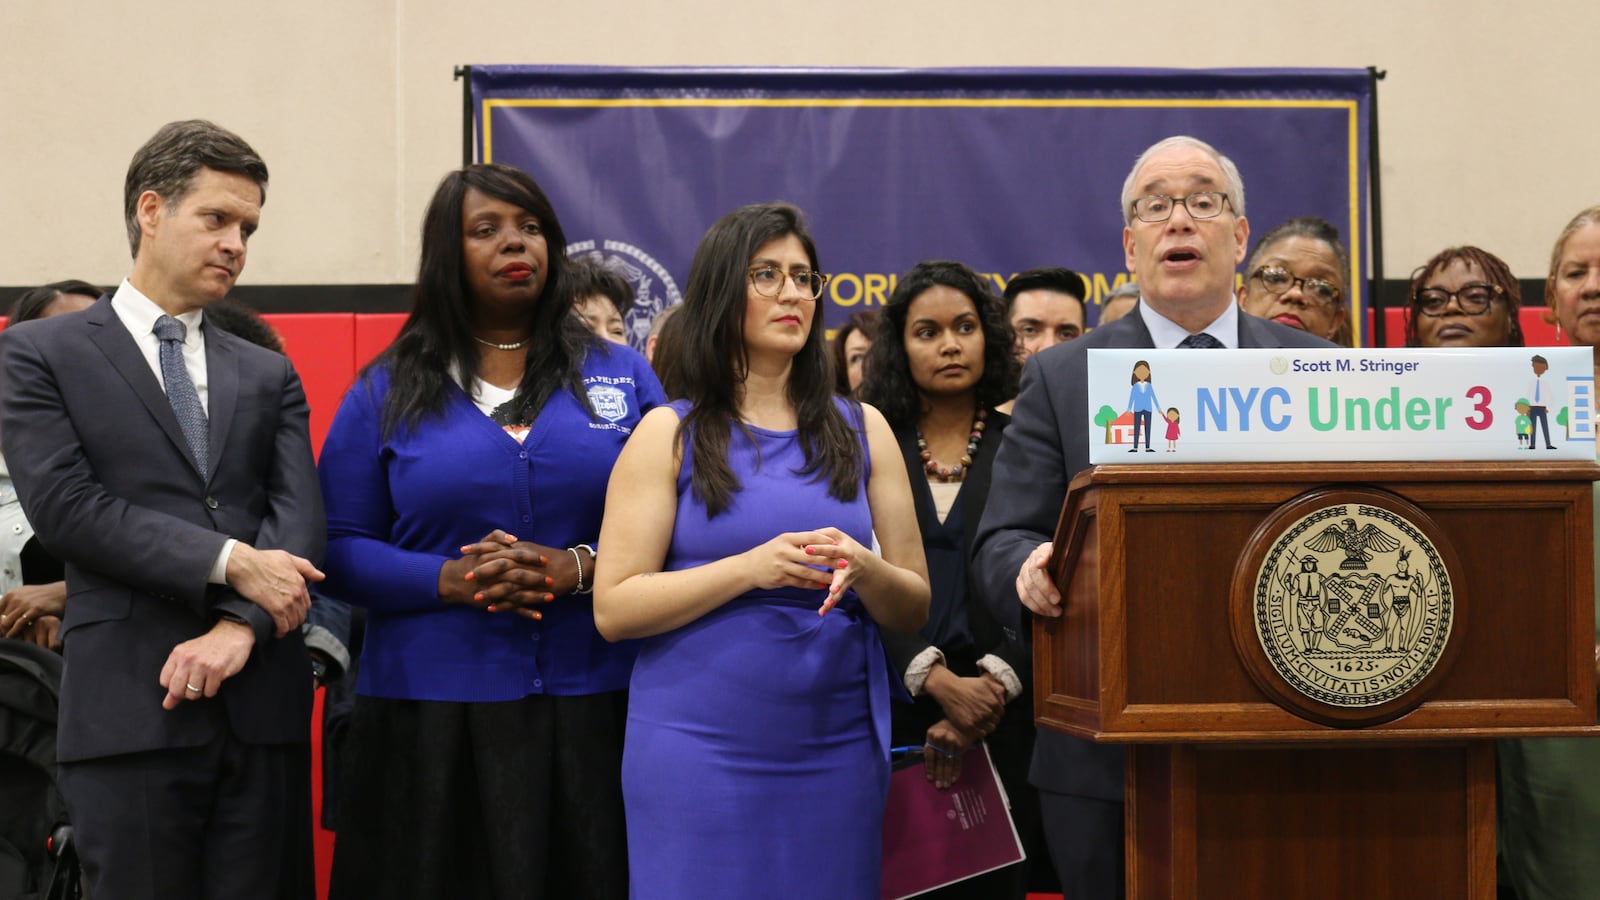 New York City comptroller Scott Stringer stands alongside state senators Brad Hoylman and Jessica Ramos, and Assemblywoman Latrice Walker, to call for a new payroll tax to pay for subsidized childcare.